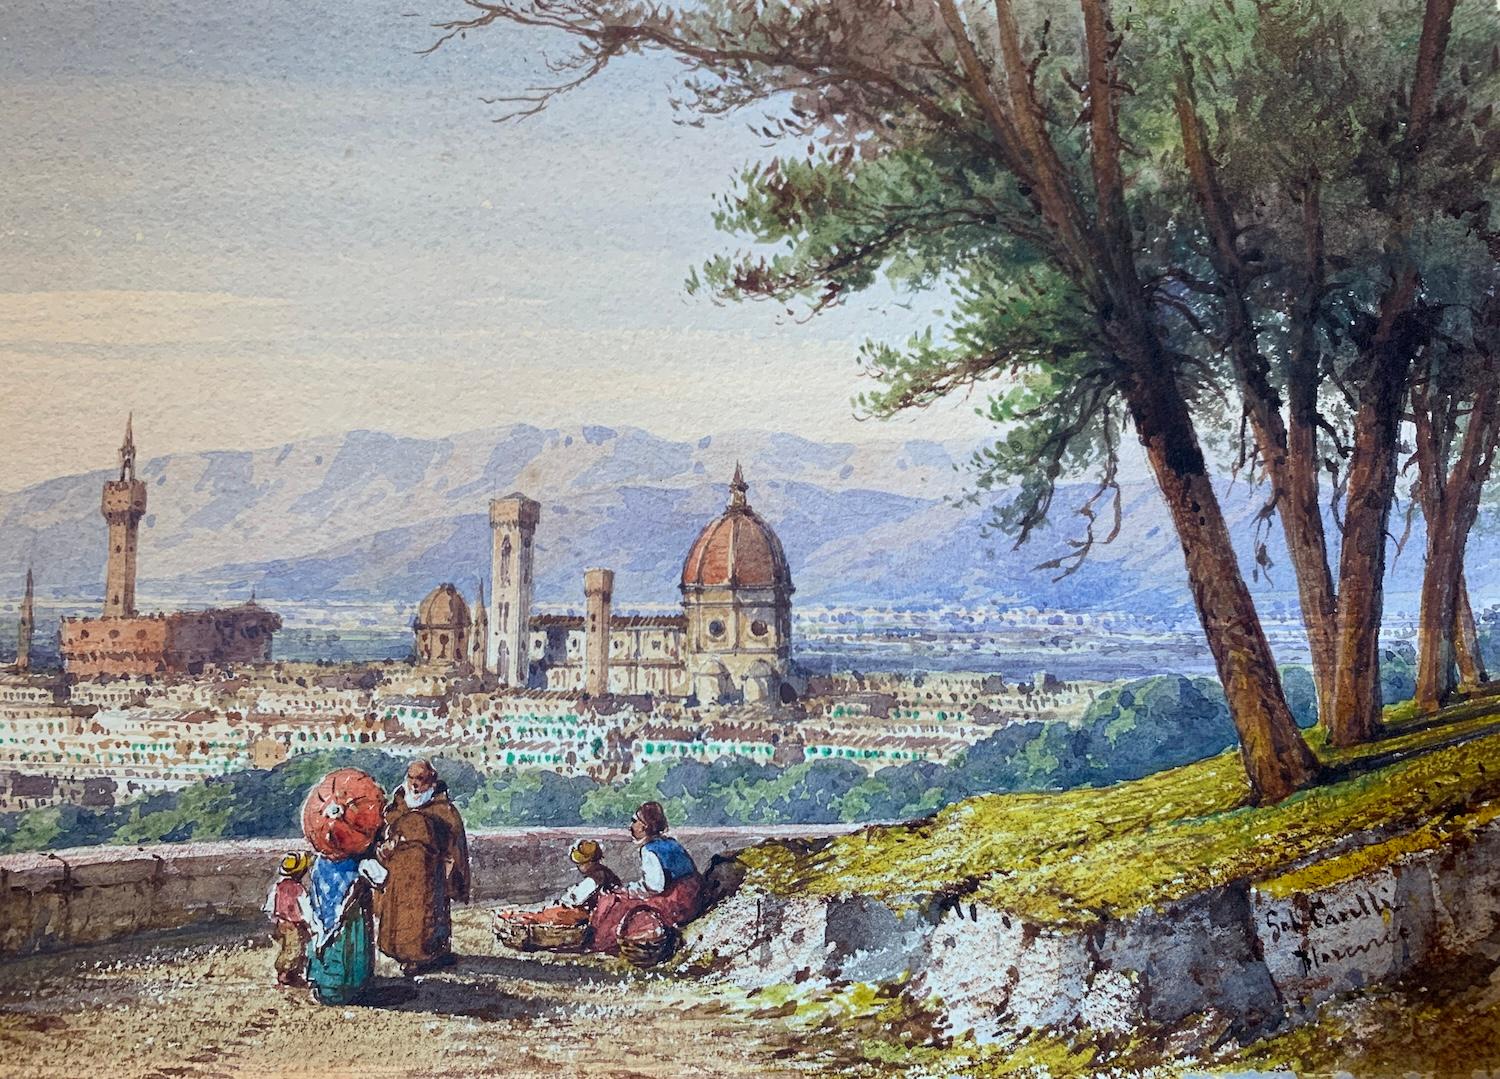 Gabrielli Carelli Figurative Art - Figurative landscape watercolor drawing with 19th century view of Florence